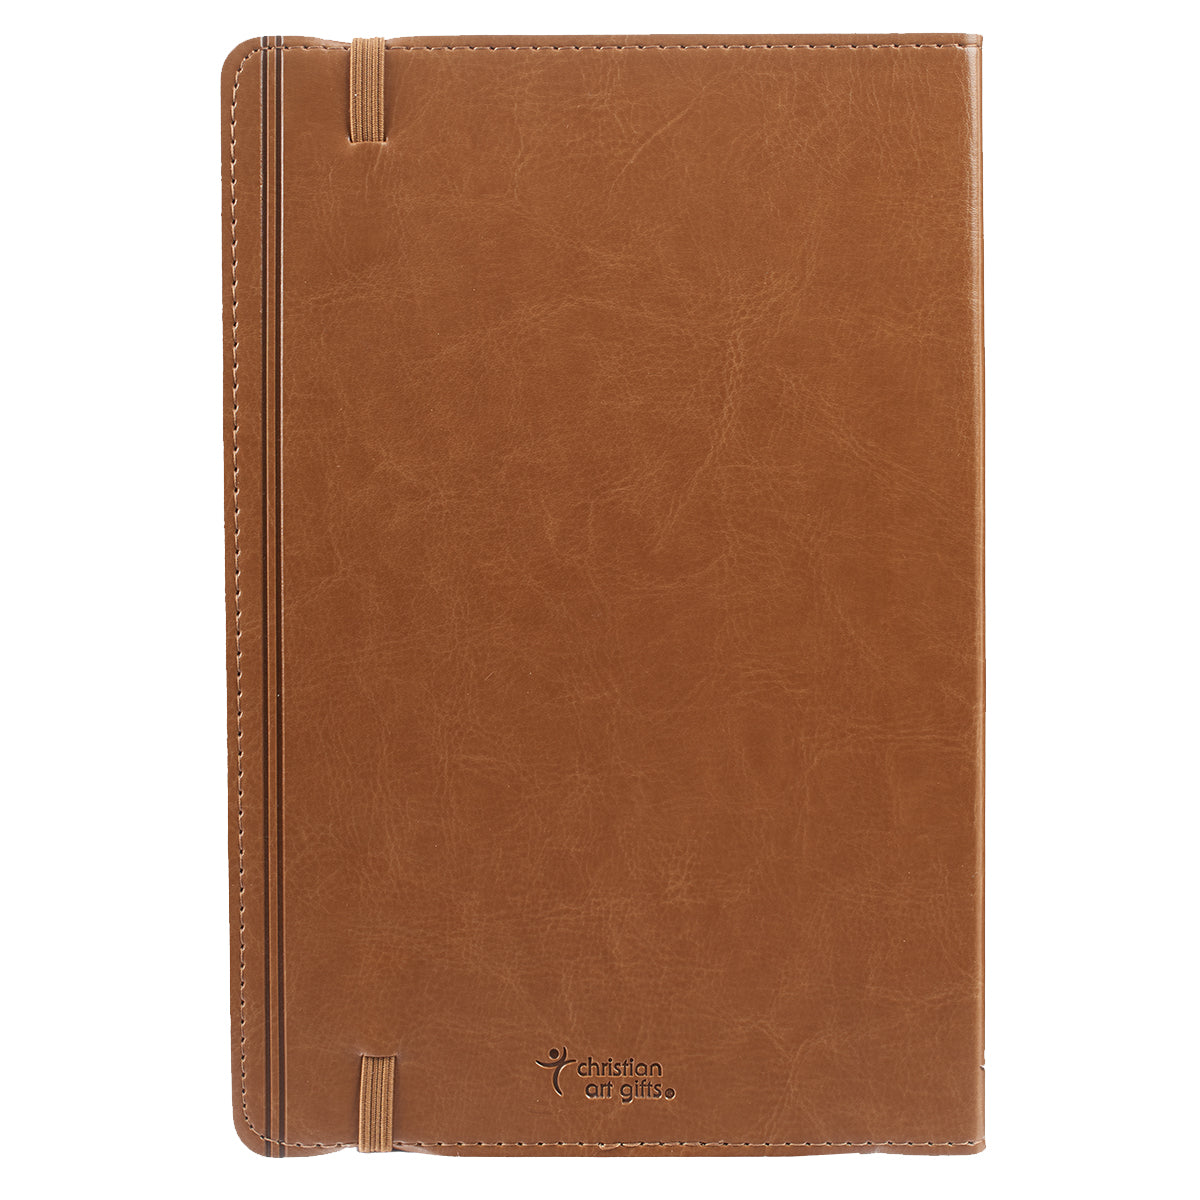 Be Still & Know Tan Flexcover Journal - Psalm 46:10 - The Christian Gift Company